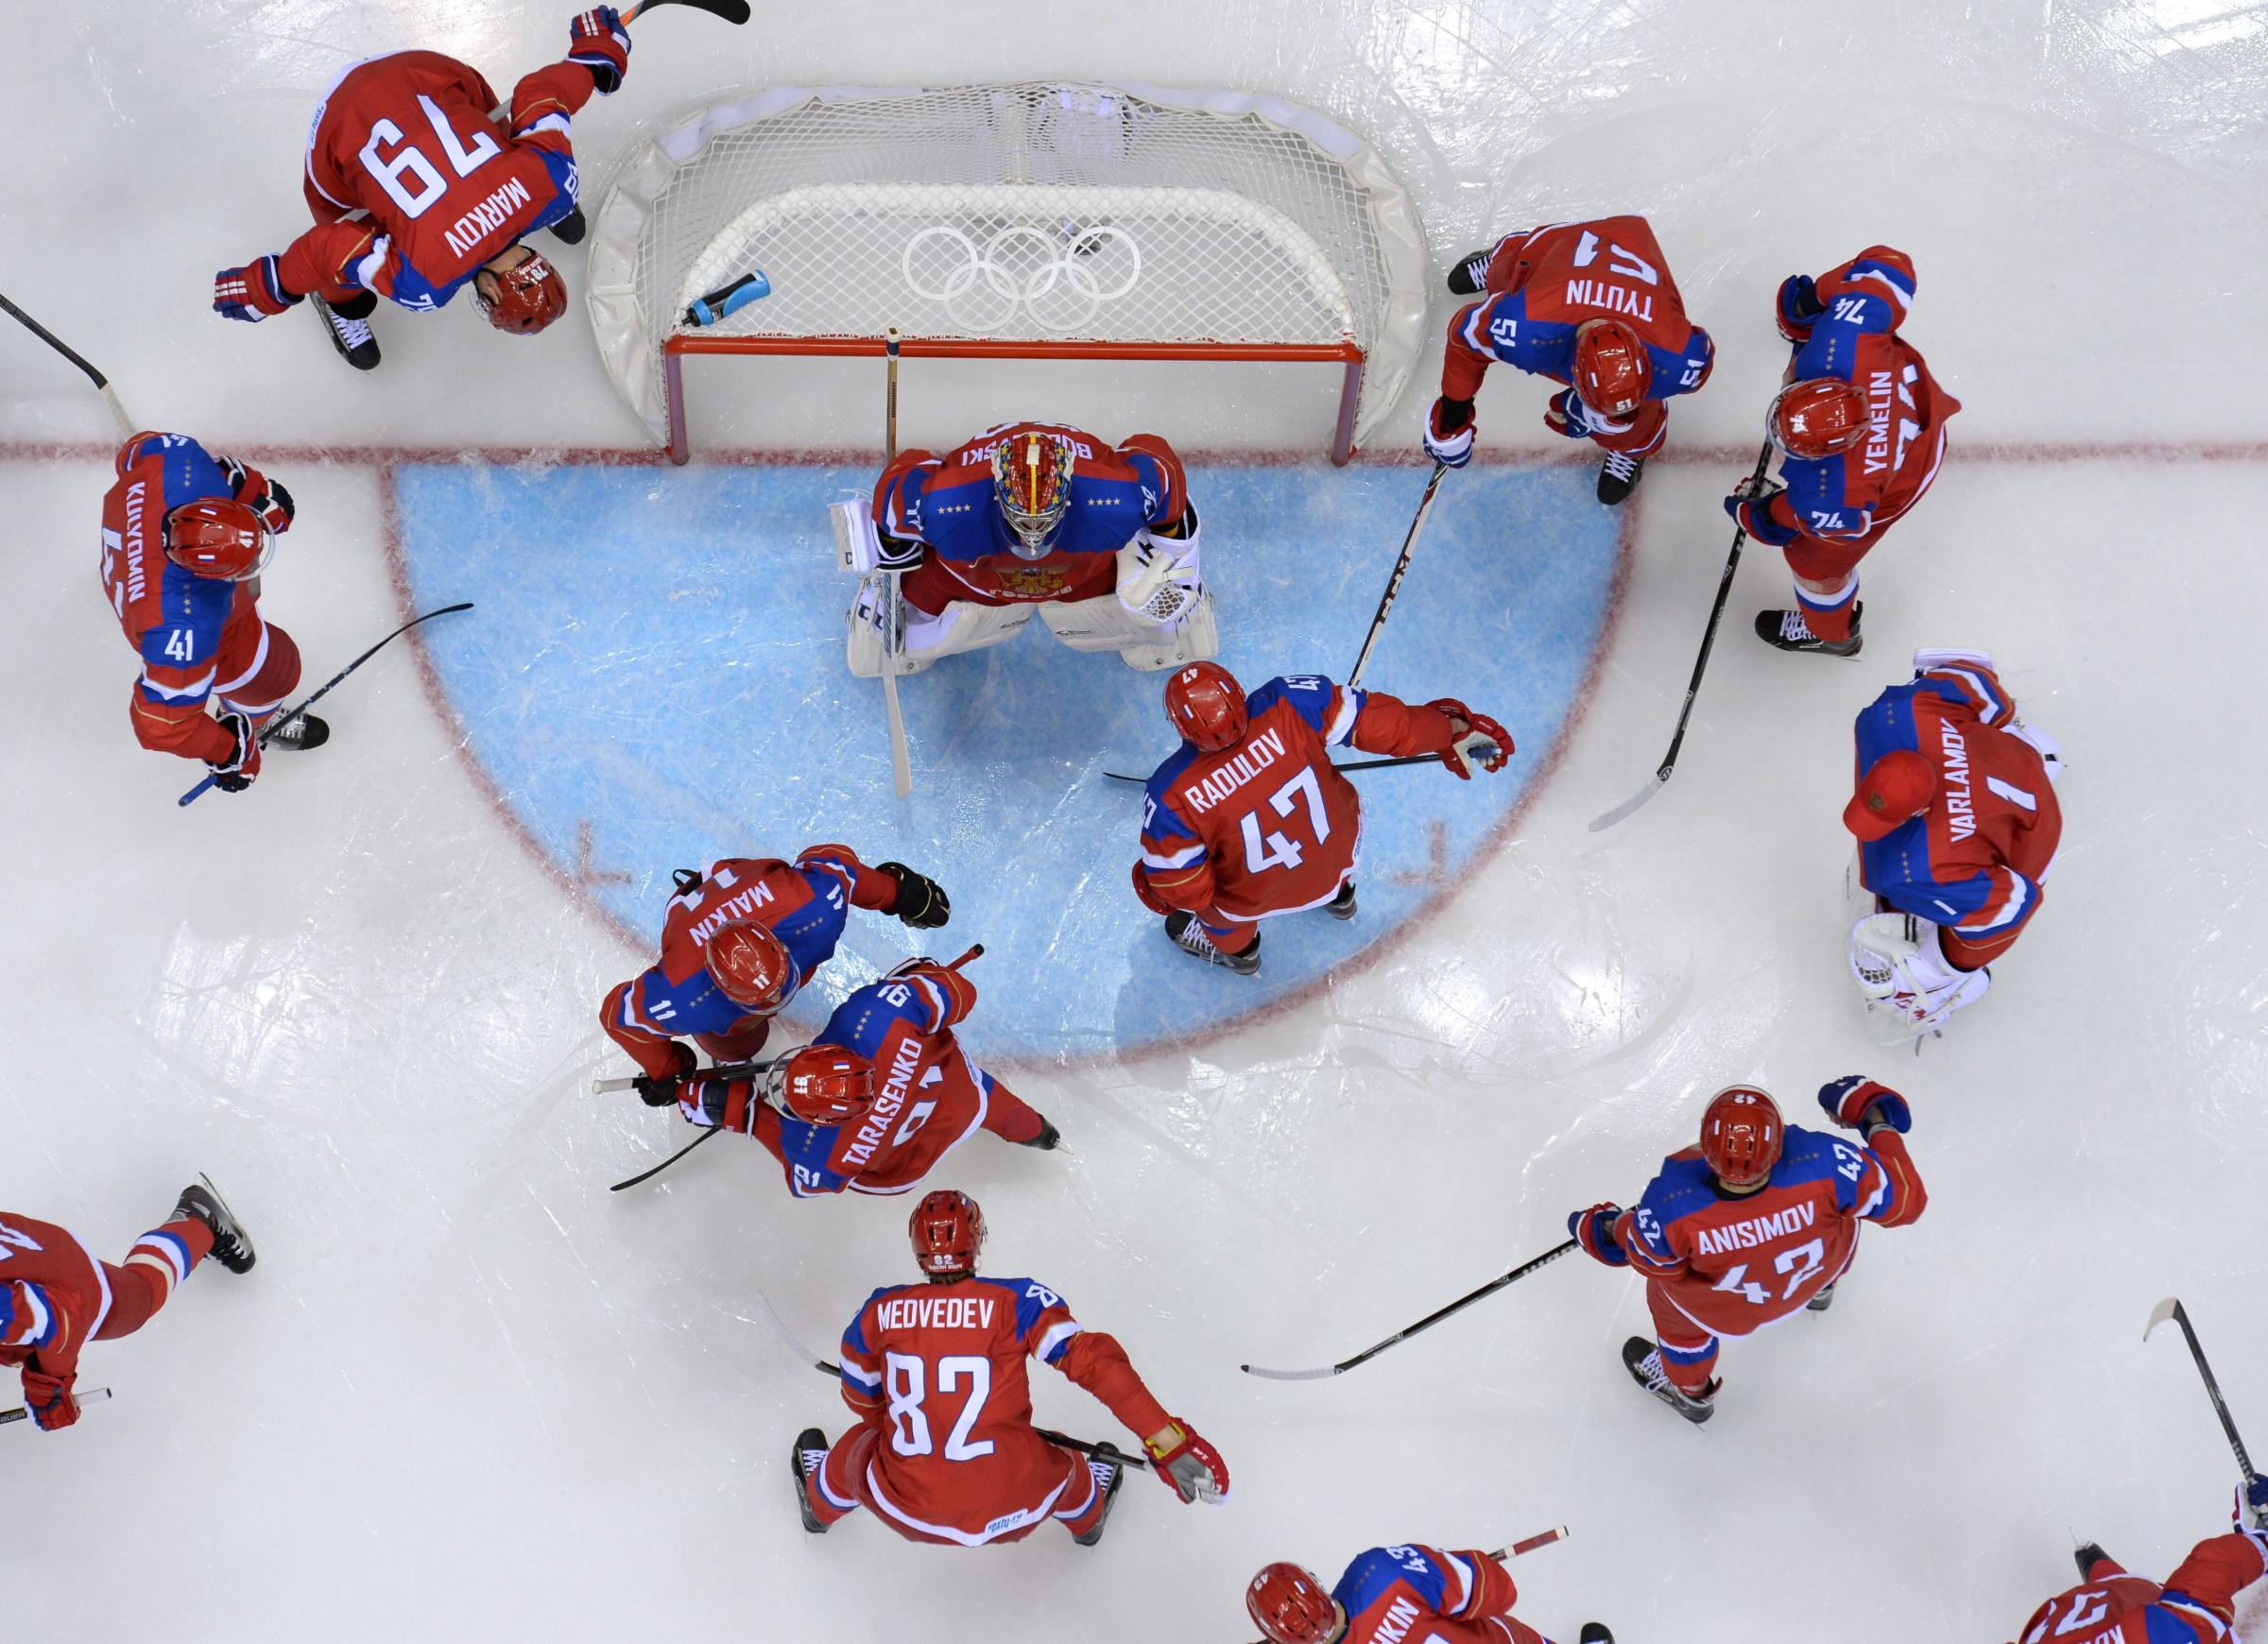 Russia's players gather before the start of the Men's Ice Hockey play-offs qualification match Russia vs Norway at the Bolshoy Ice Dome.